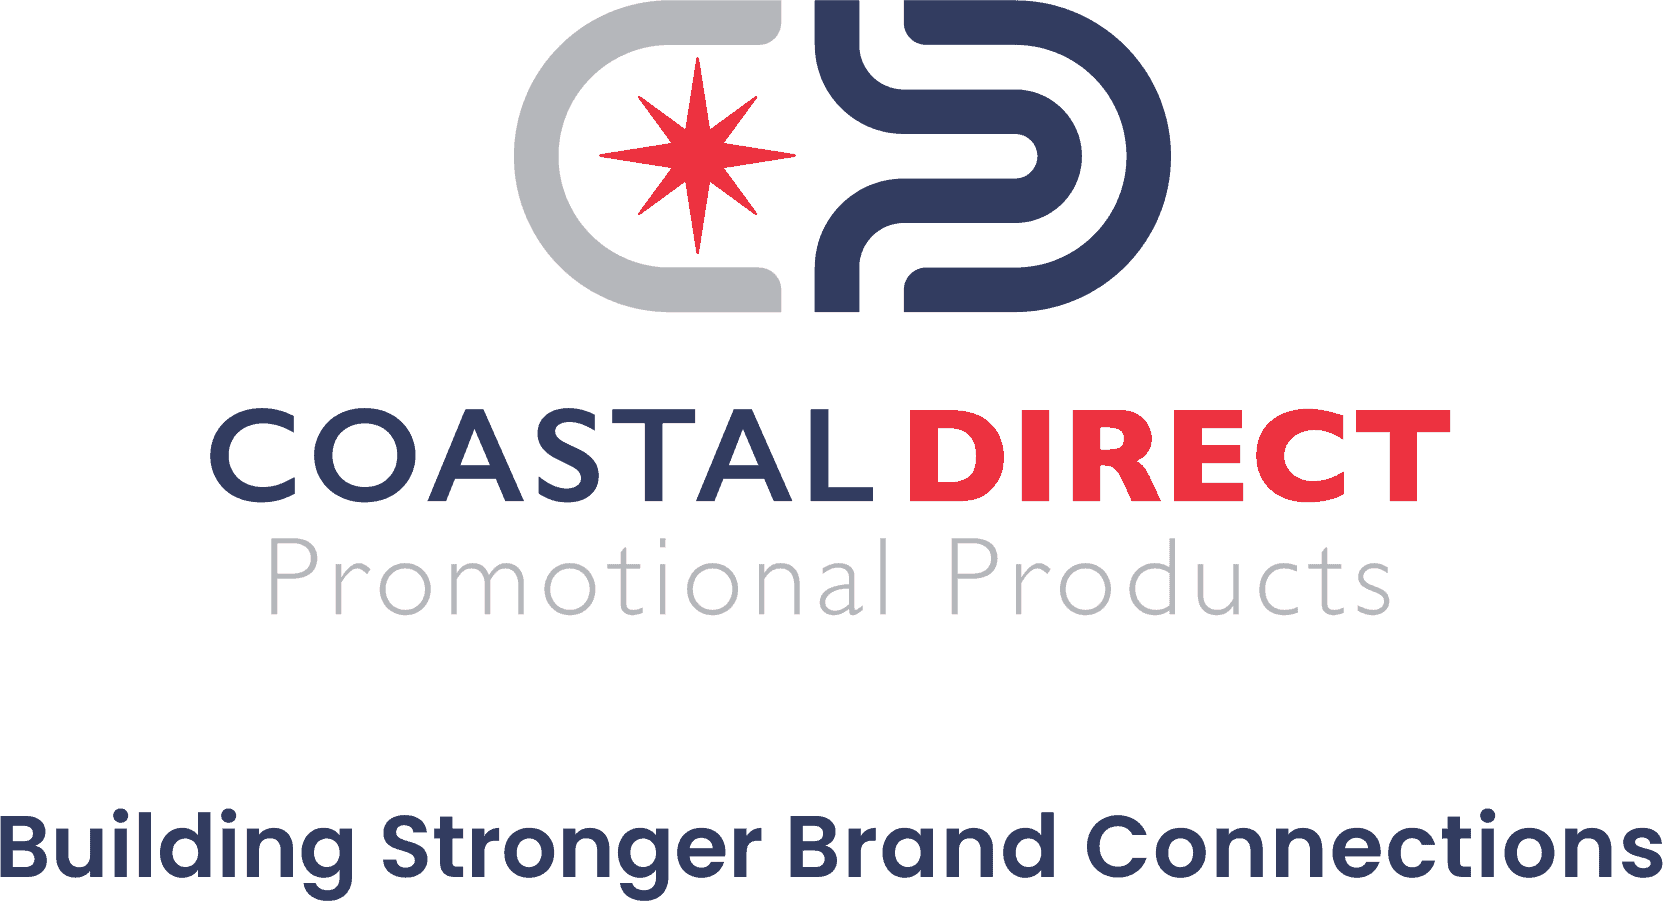 Coastal Direct Promotional Products